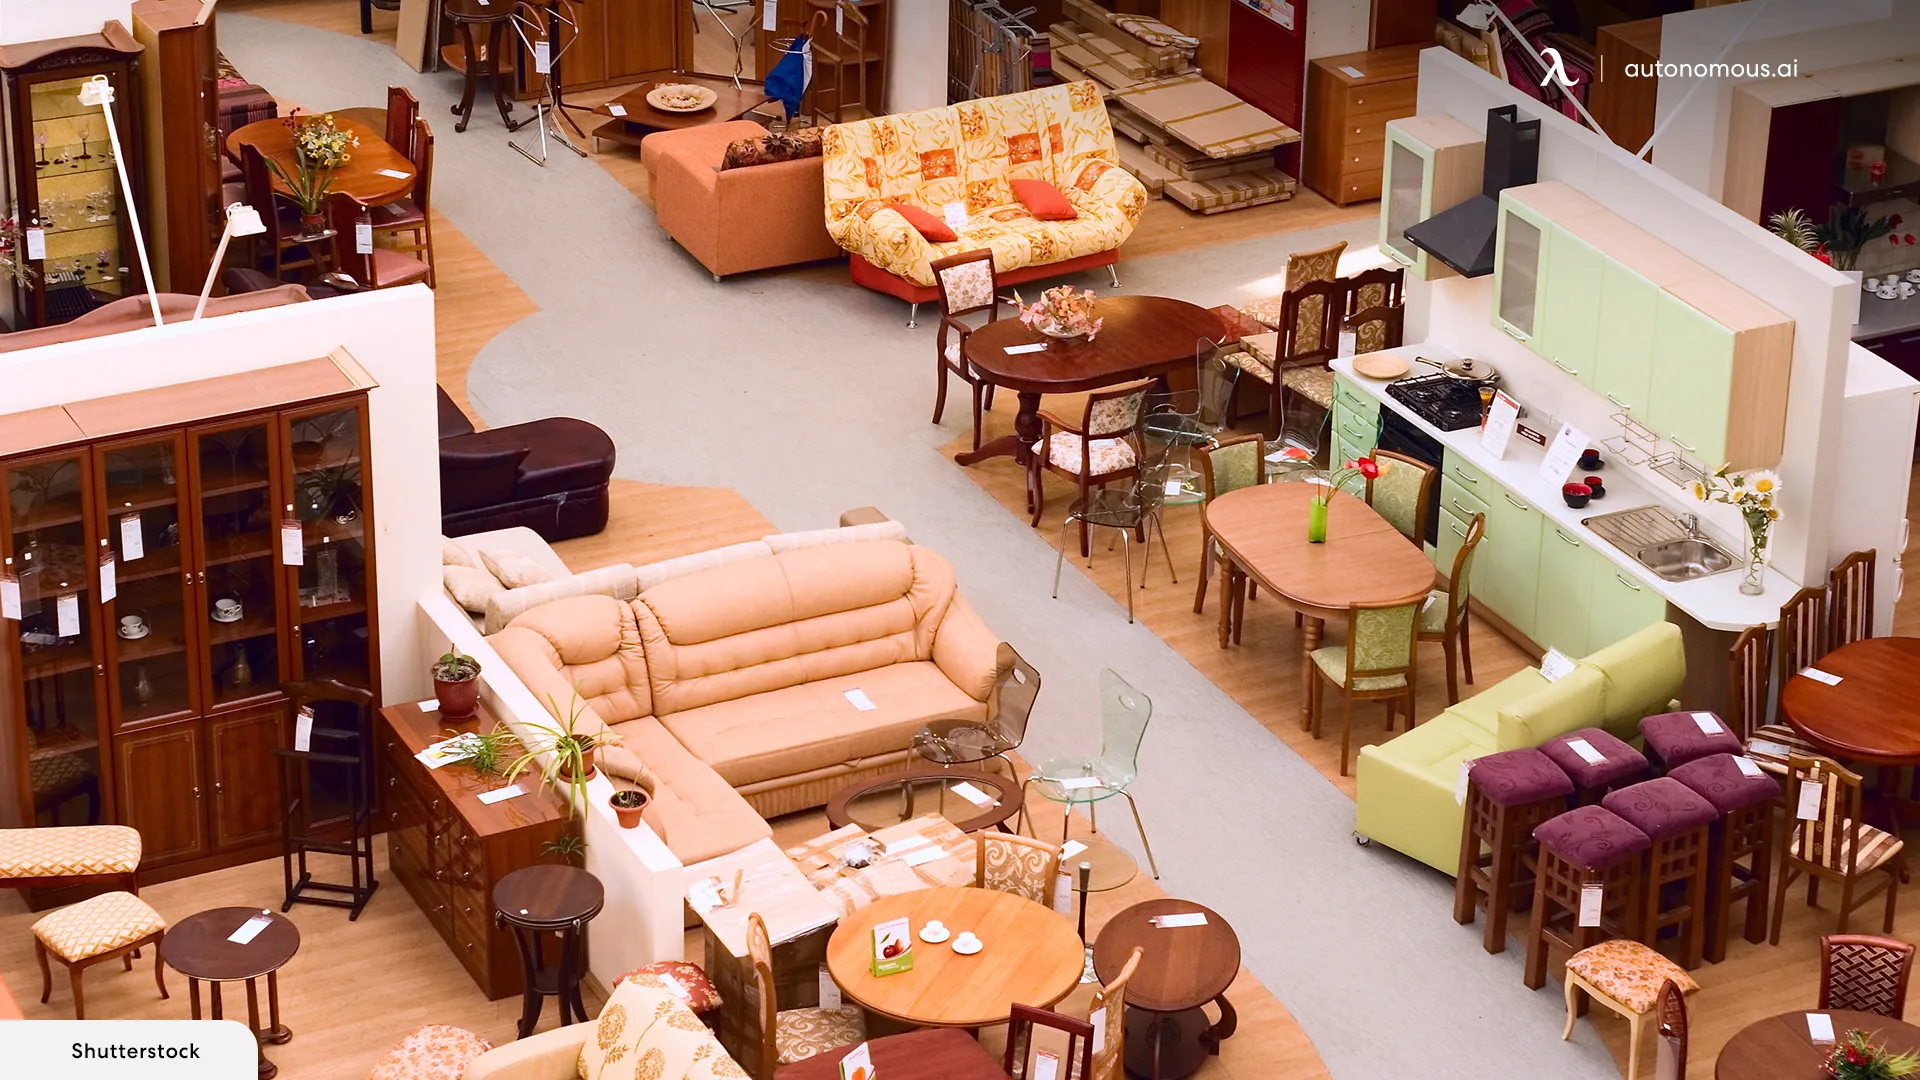 Salt Lake City's Furniture Stores: Quality Finds for Home & Office